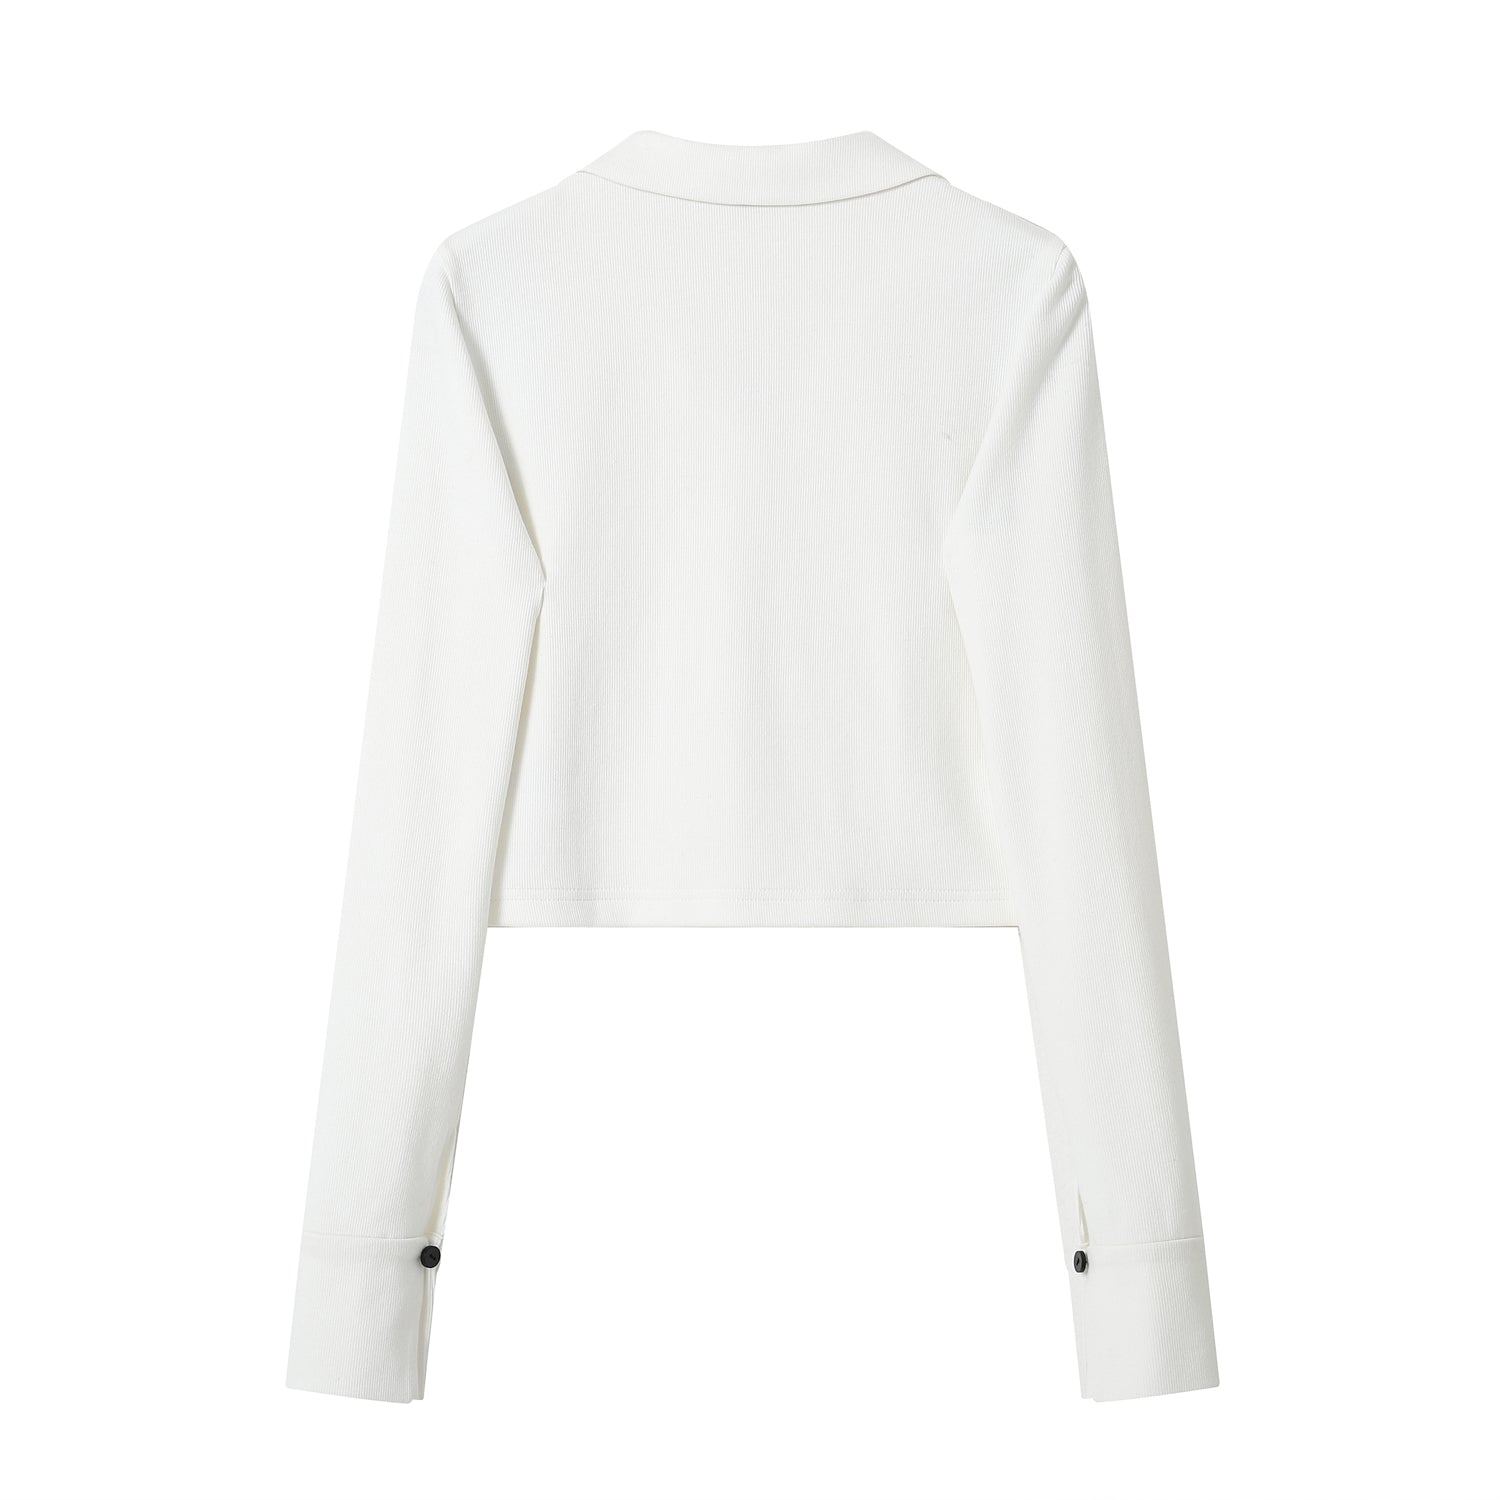 SOMESOWE Black And White Ripped Shoulder Knitted Shirt | MADA IN CHINA